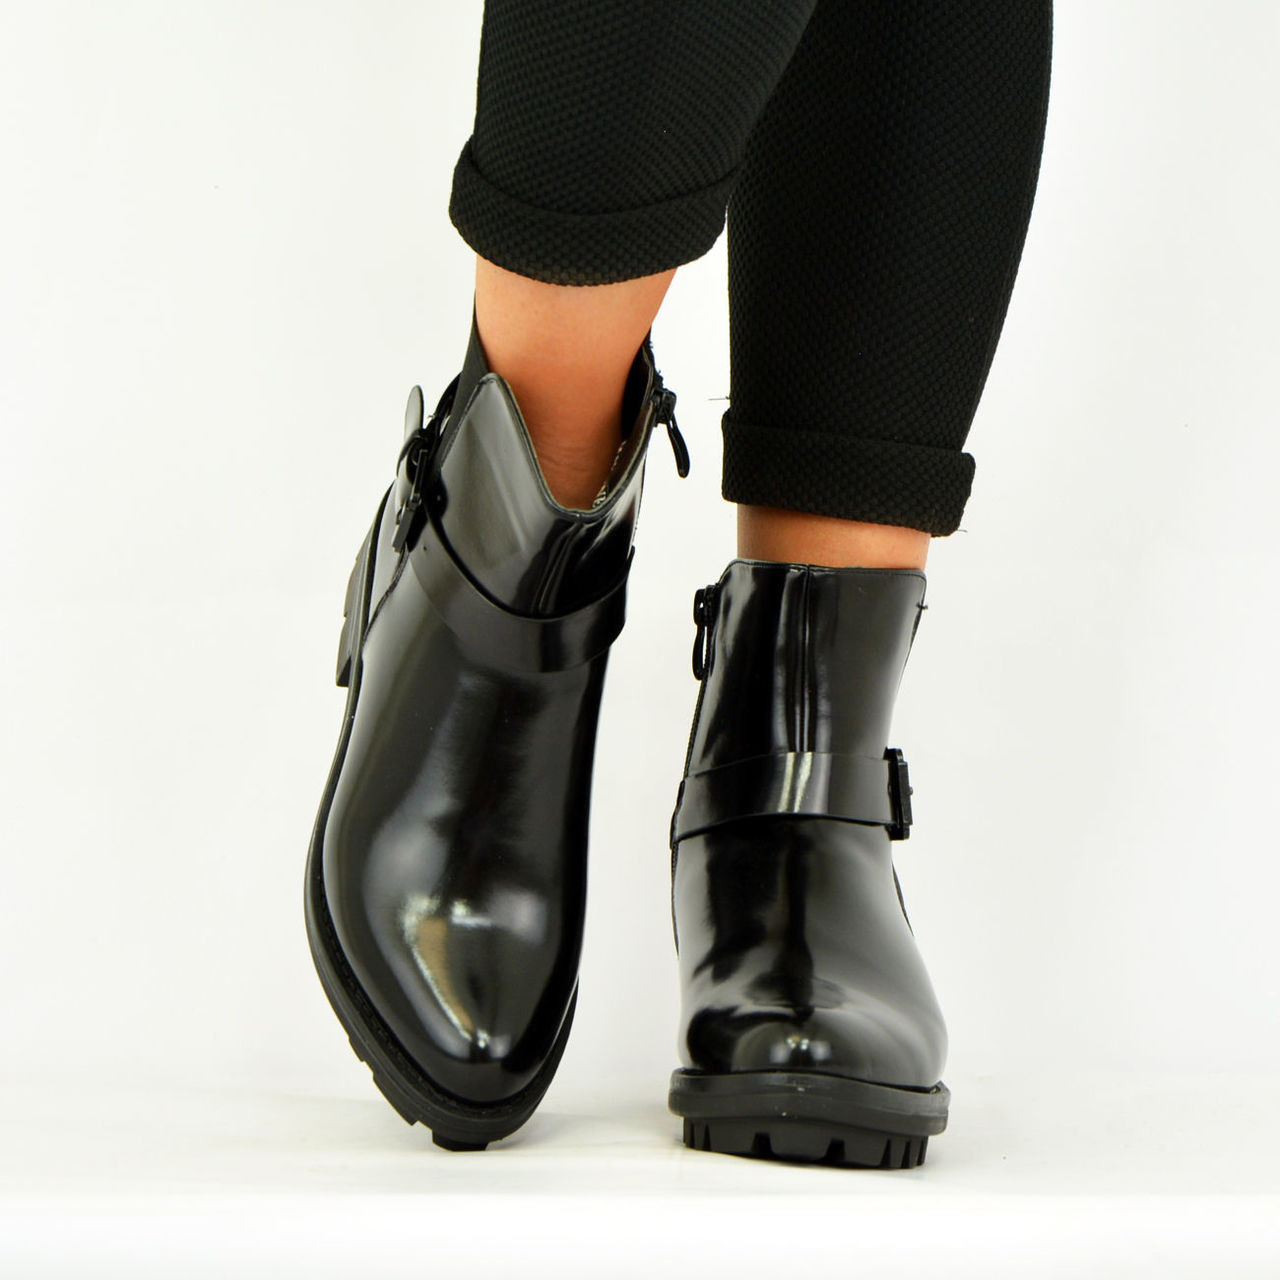 cleated sole ankle boots